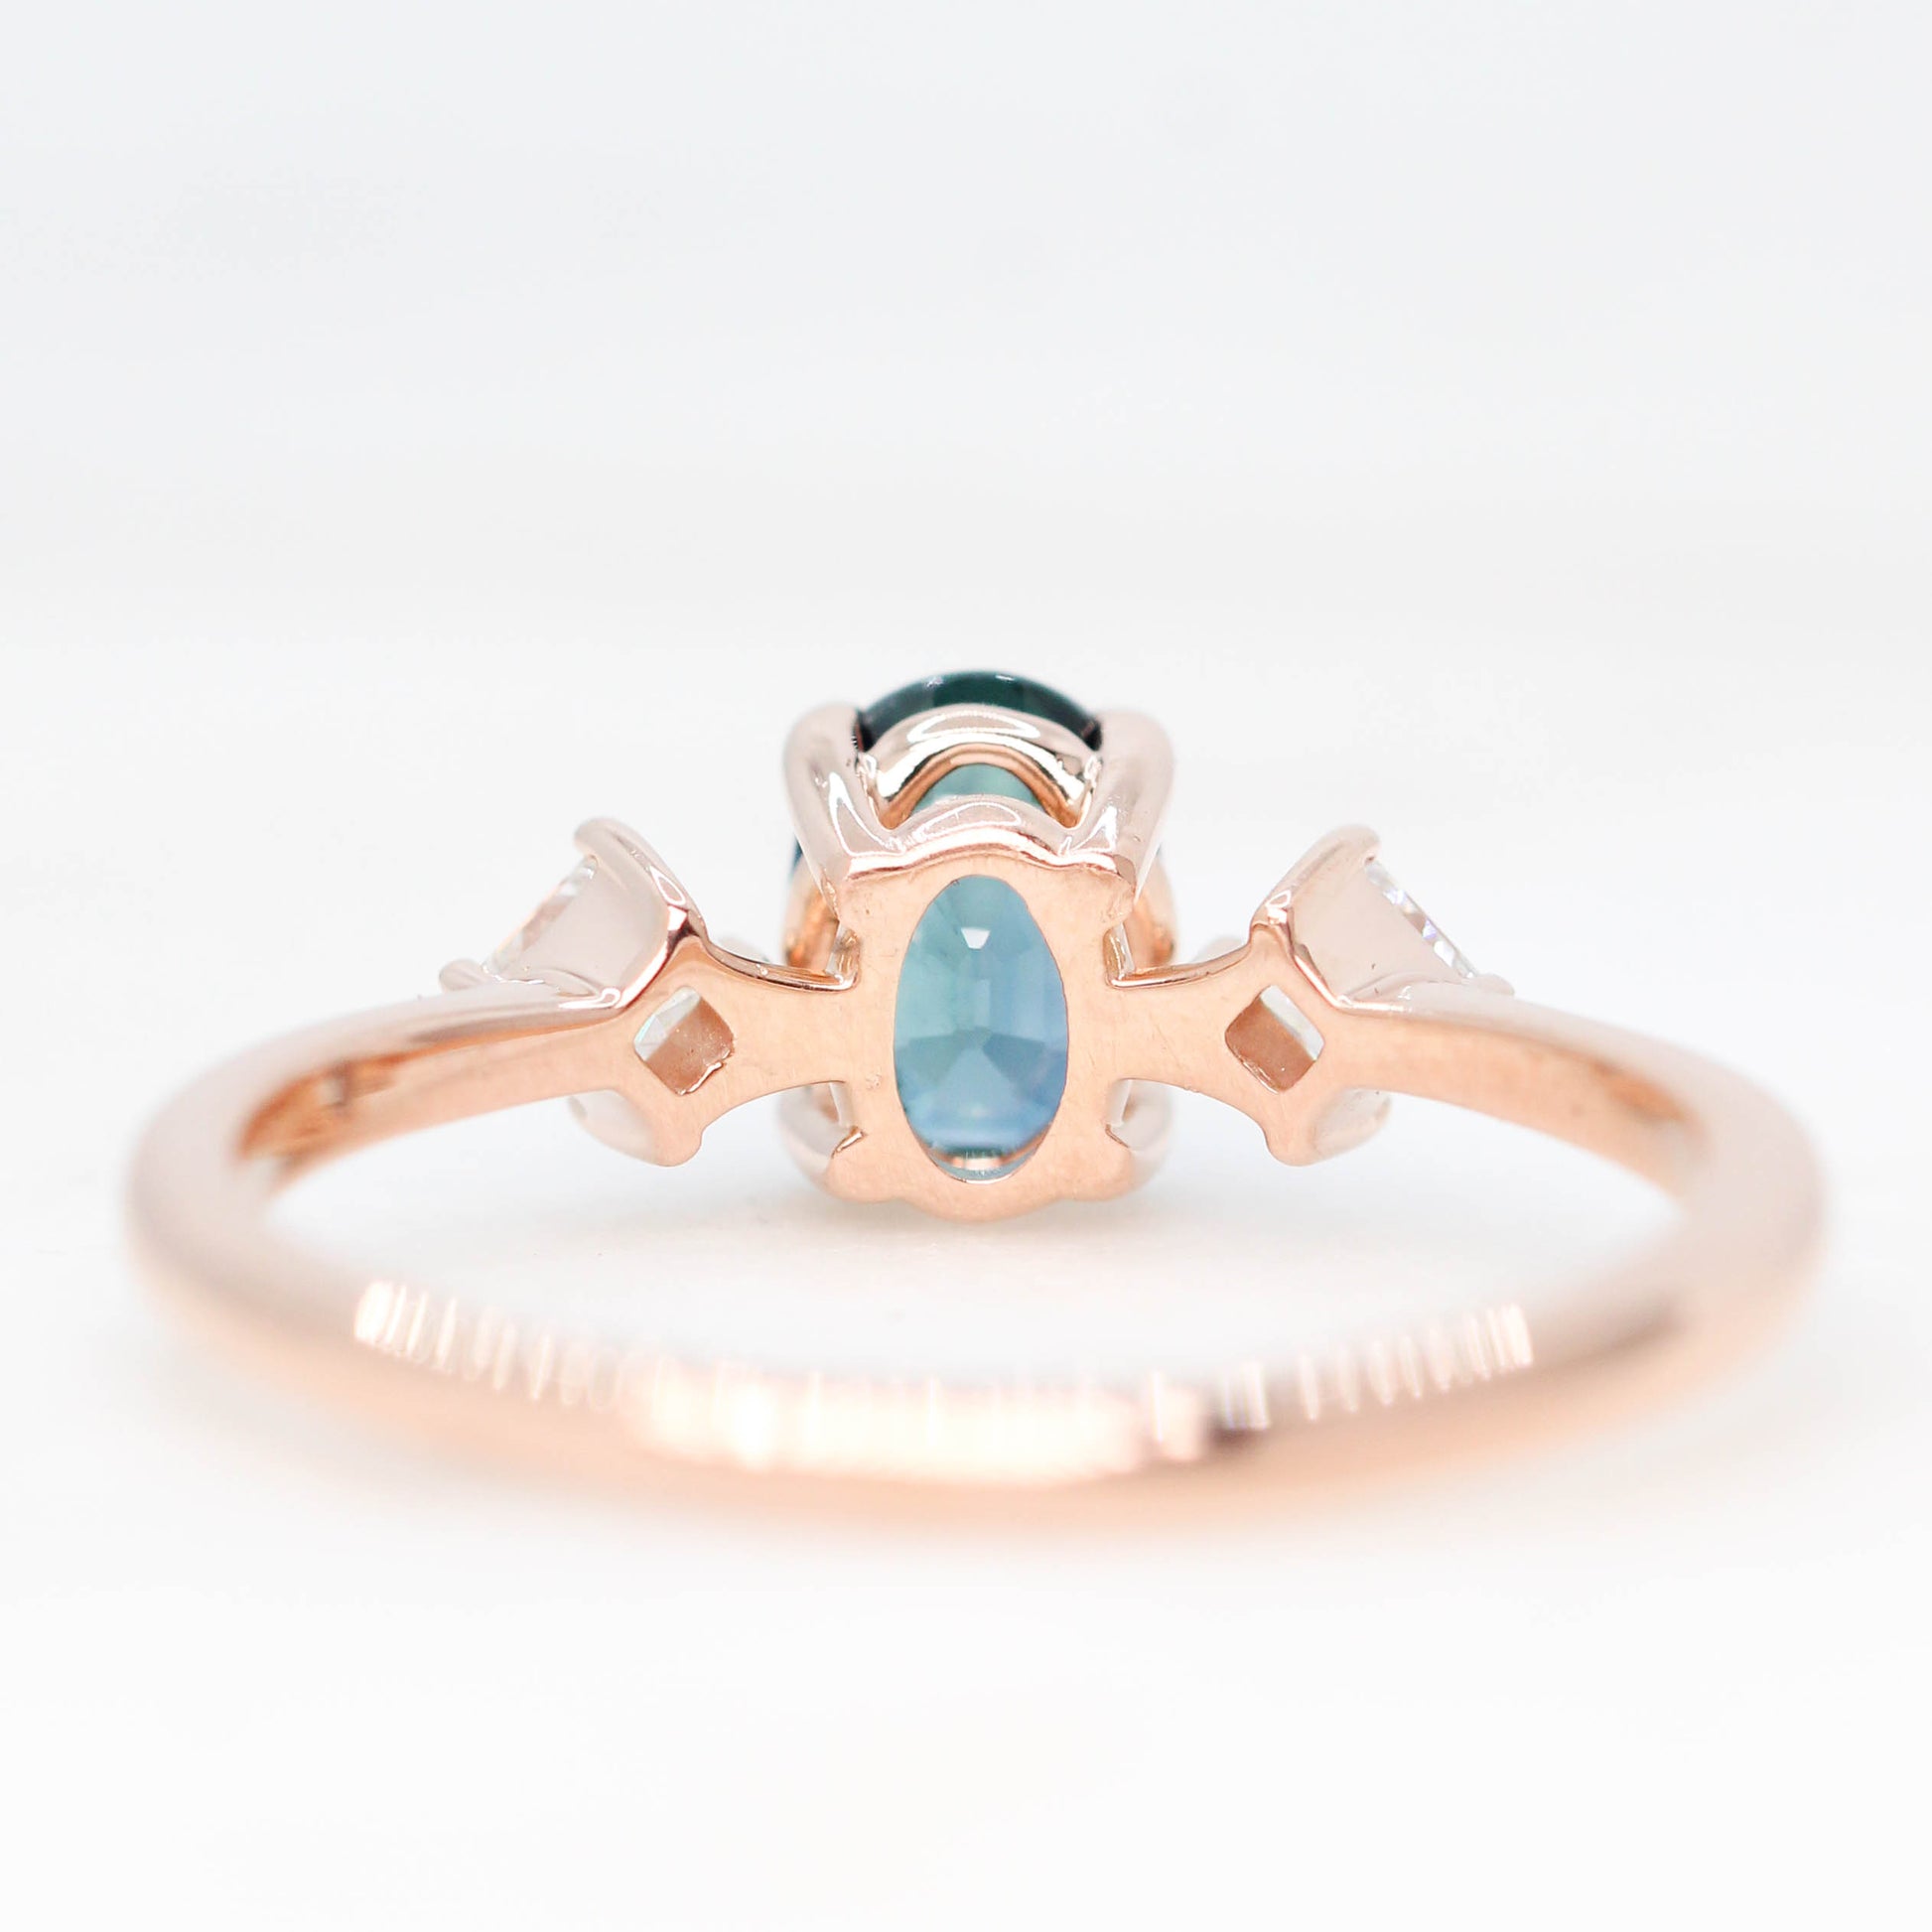 Angelique Ring with a 1.07 Carat Teal Oval Madagascar Sapphire and White Accent Diamonds in 14k Rose Gold - Ready to Size and Ship - Midwinter Co. Alternative Bridal Rings and Modern Fine Jewelry